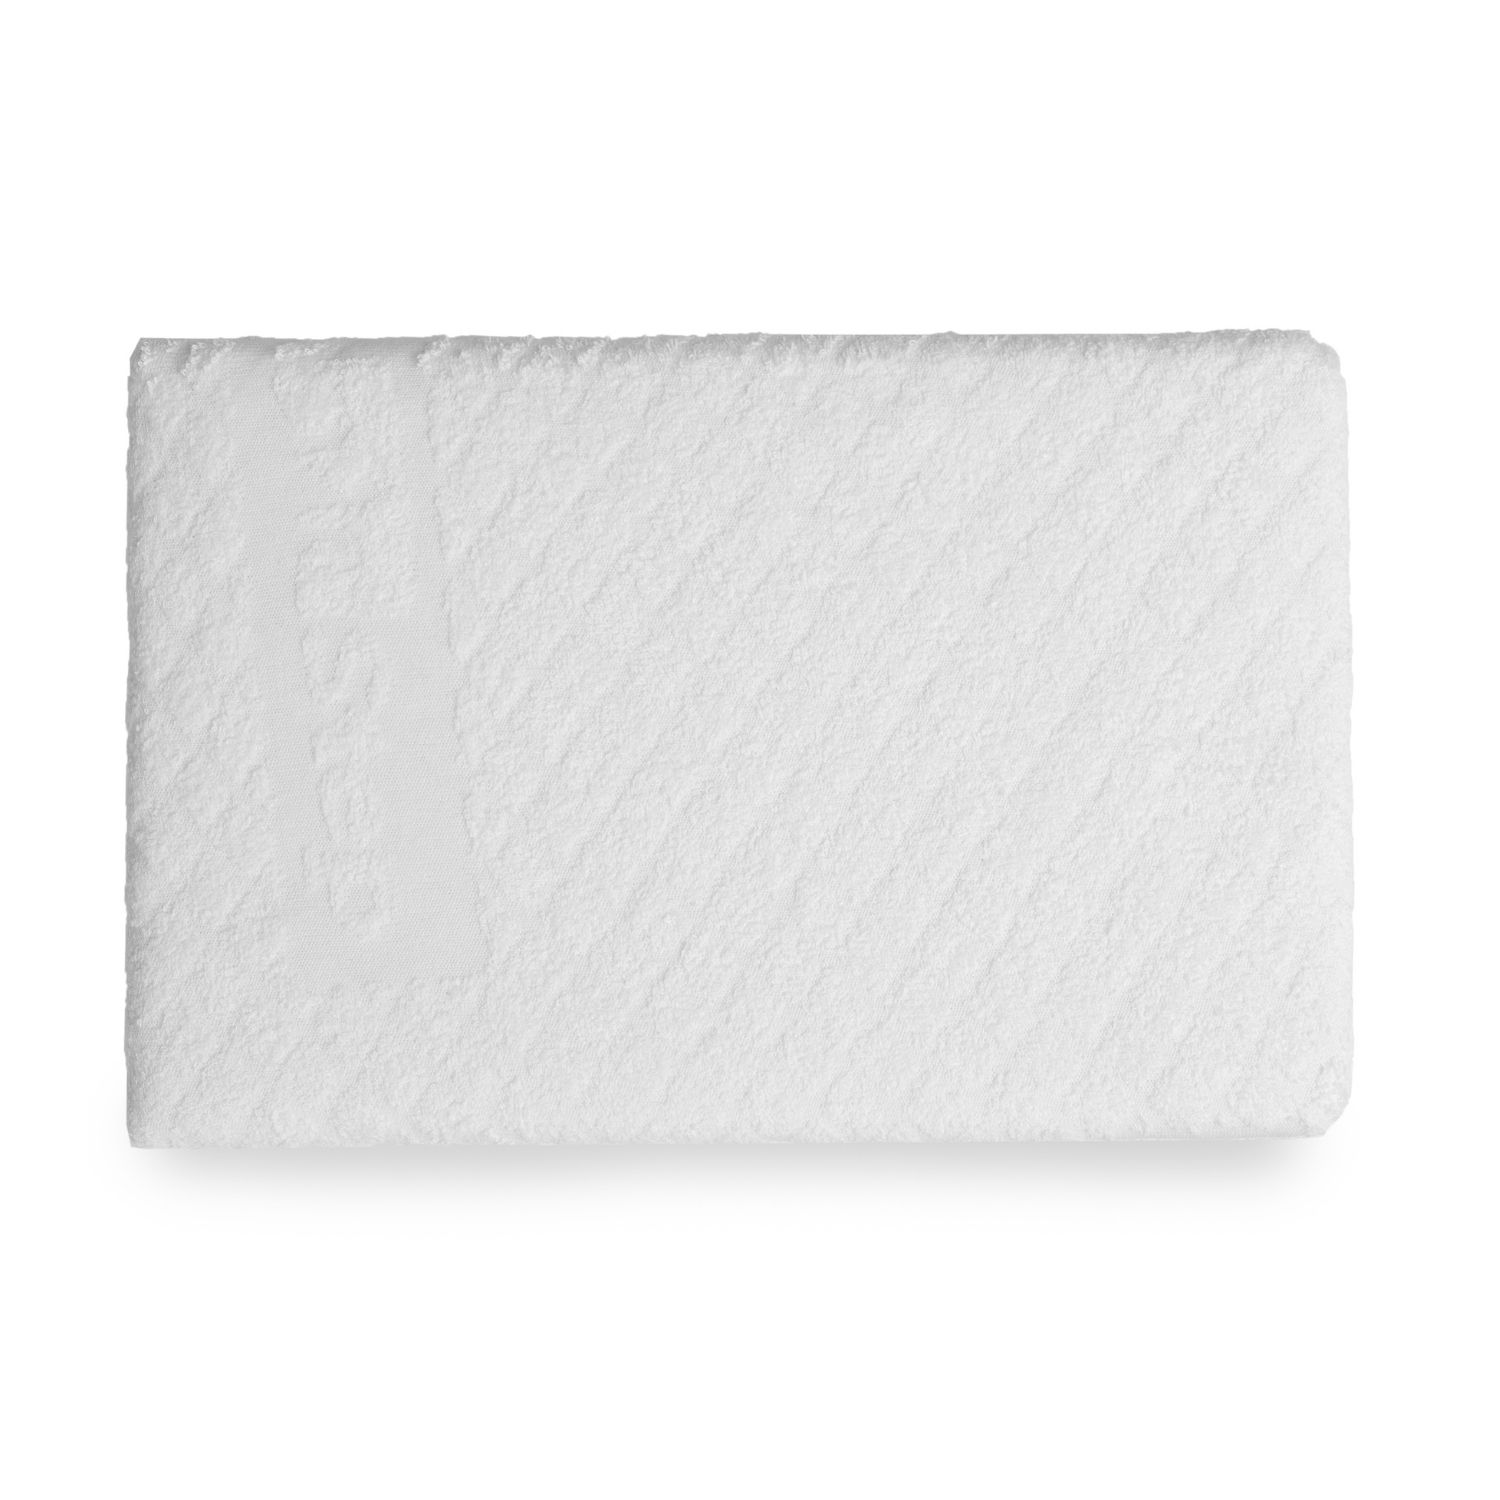 Waterproof Pillow Cases Care Protect (pair)